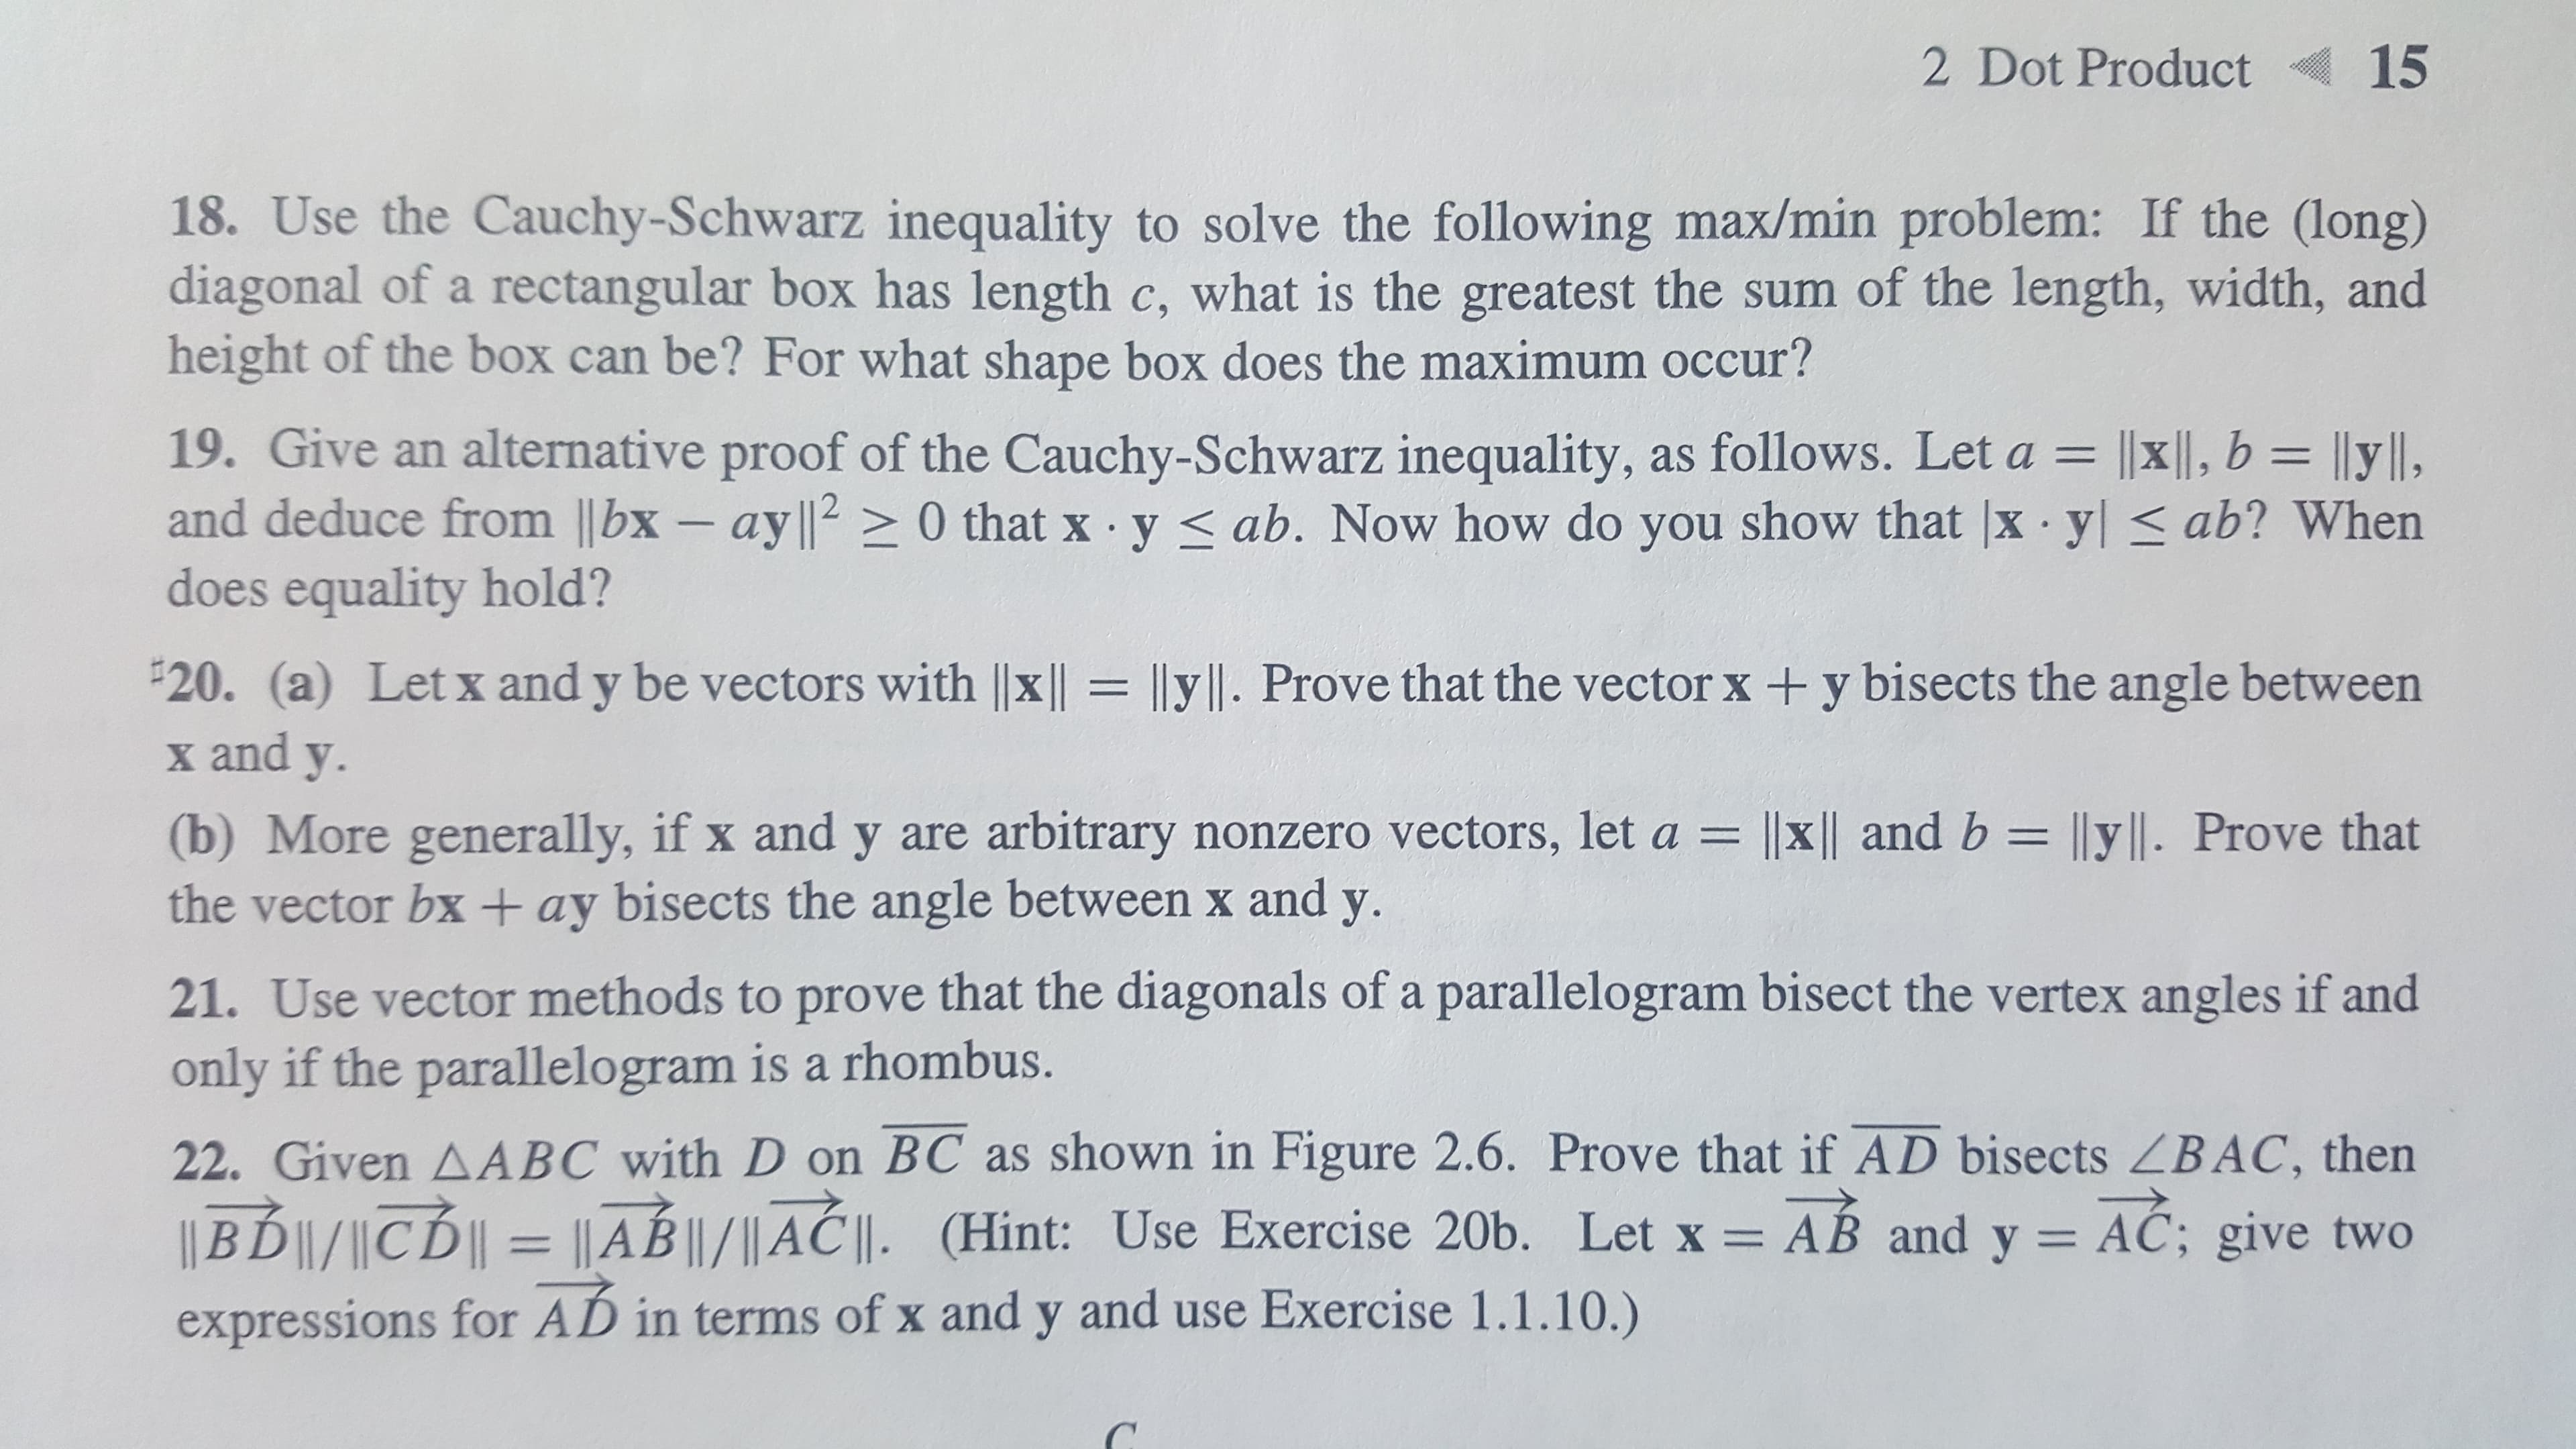 2 Dot Product
15
18. Use the Cauchy-Schwarz inequality to solve the following max/min problem: If the (long)
diagonal of a rectangular box has length c, what is the greatest the sum of the length, width, and
height of the box can be? For what shape box does the maximum occur?
19. Give an alternative proof of the Cauchy-Schwarz inequality, as follows. Let a = |x||, b = ||y||,
and deduce from ||bx - ay l|20 that x y ab. Now how do you show that |x yl ab? When
does equality hold?
20. (a) Letx and y be vectors with ||x || = lly|l. Prove that the vector x + y bisects the angle between
x and y
||x || and b = ||y||. Prove that
(b) More generally, if x and y are arbitrary nonzero vectors, let a
the vector bx + ay bisects the angle between x and y.
21. Use vector methods to prove that the diagonals of a parallelogram bisect the vertex angles if and
only if the parallelogram is a rhombus.
22. Given AABC with D on BC as shown in Figure 2.6. Prove that if AD bisects ZBAC, then
BD|/CD|
||AB ||/|| A || . (Hint: Use Exercise 20b. Let x = AB and y = AC; give two
expressions for AD in terms of x and y and use Exercise 1.1.10.)
